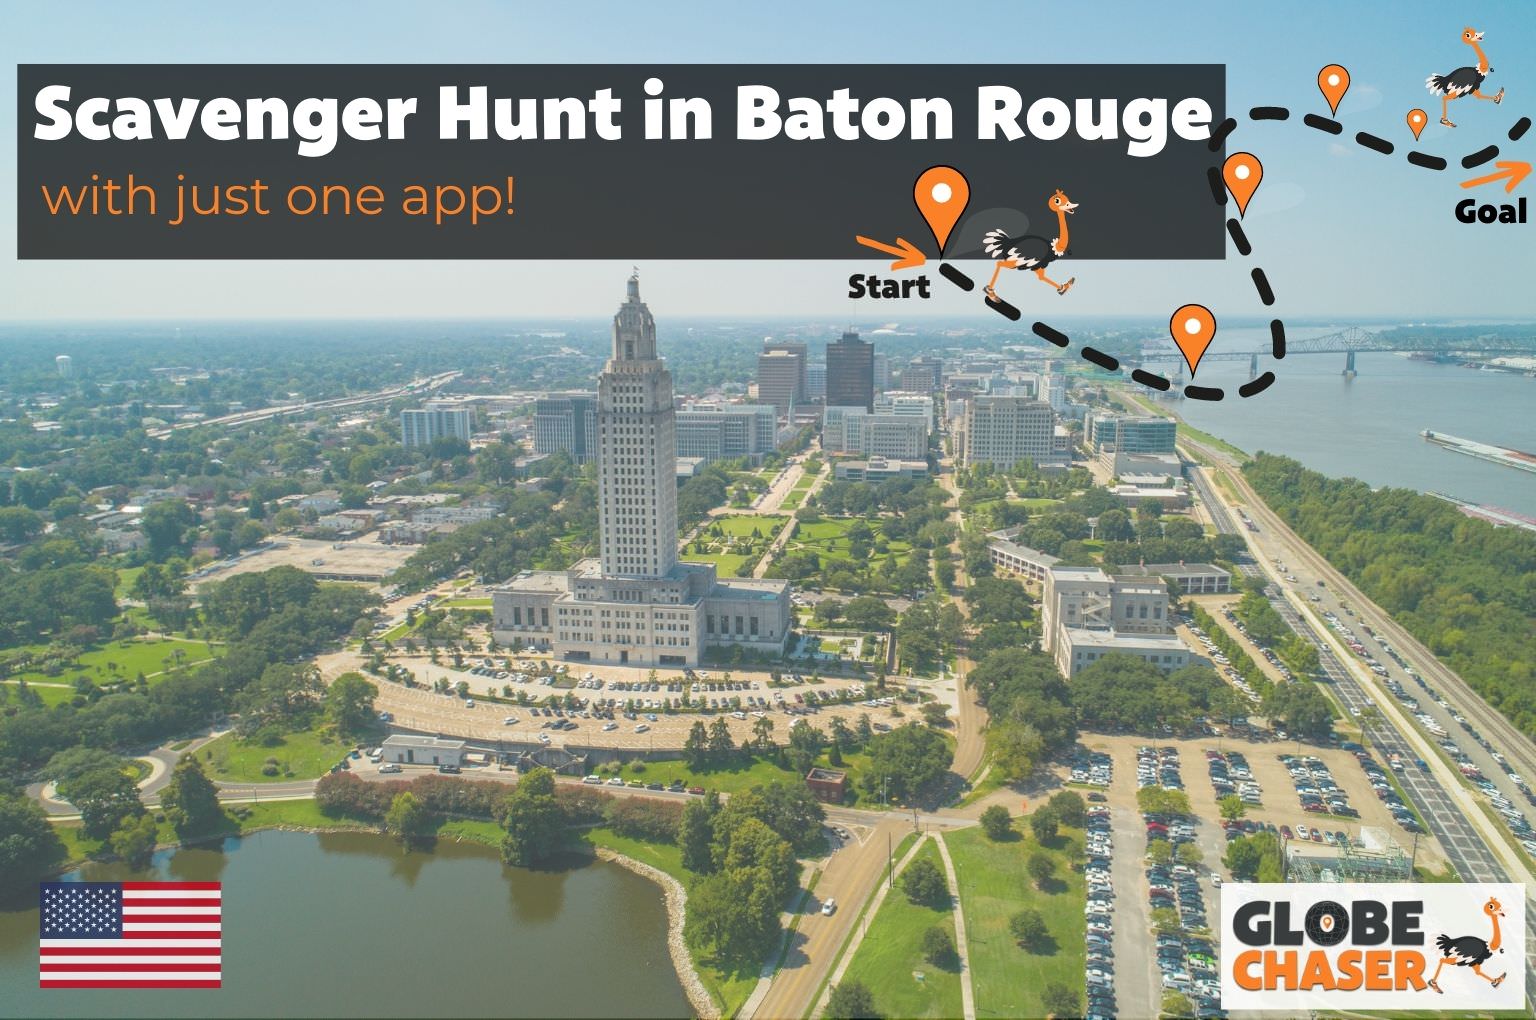 Scavenger Hunt in Baton Rouge, USA - Family Activities with the Globe Chaser App for Outdoor Fun